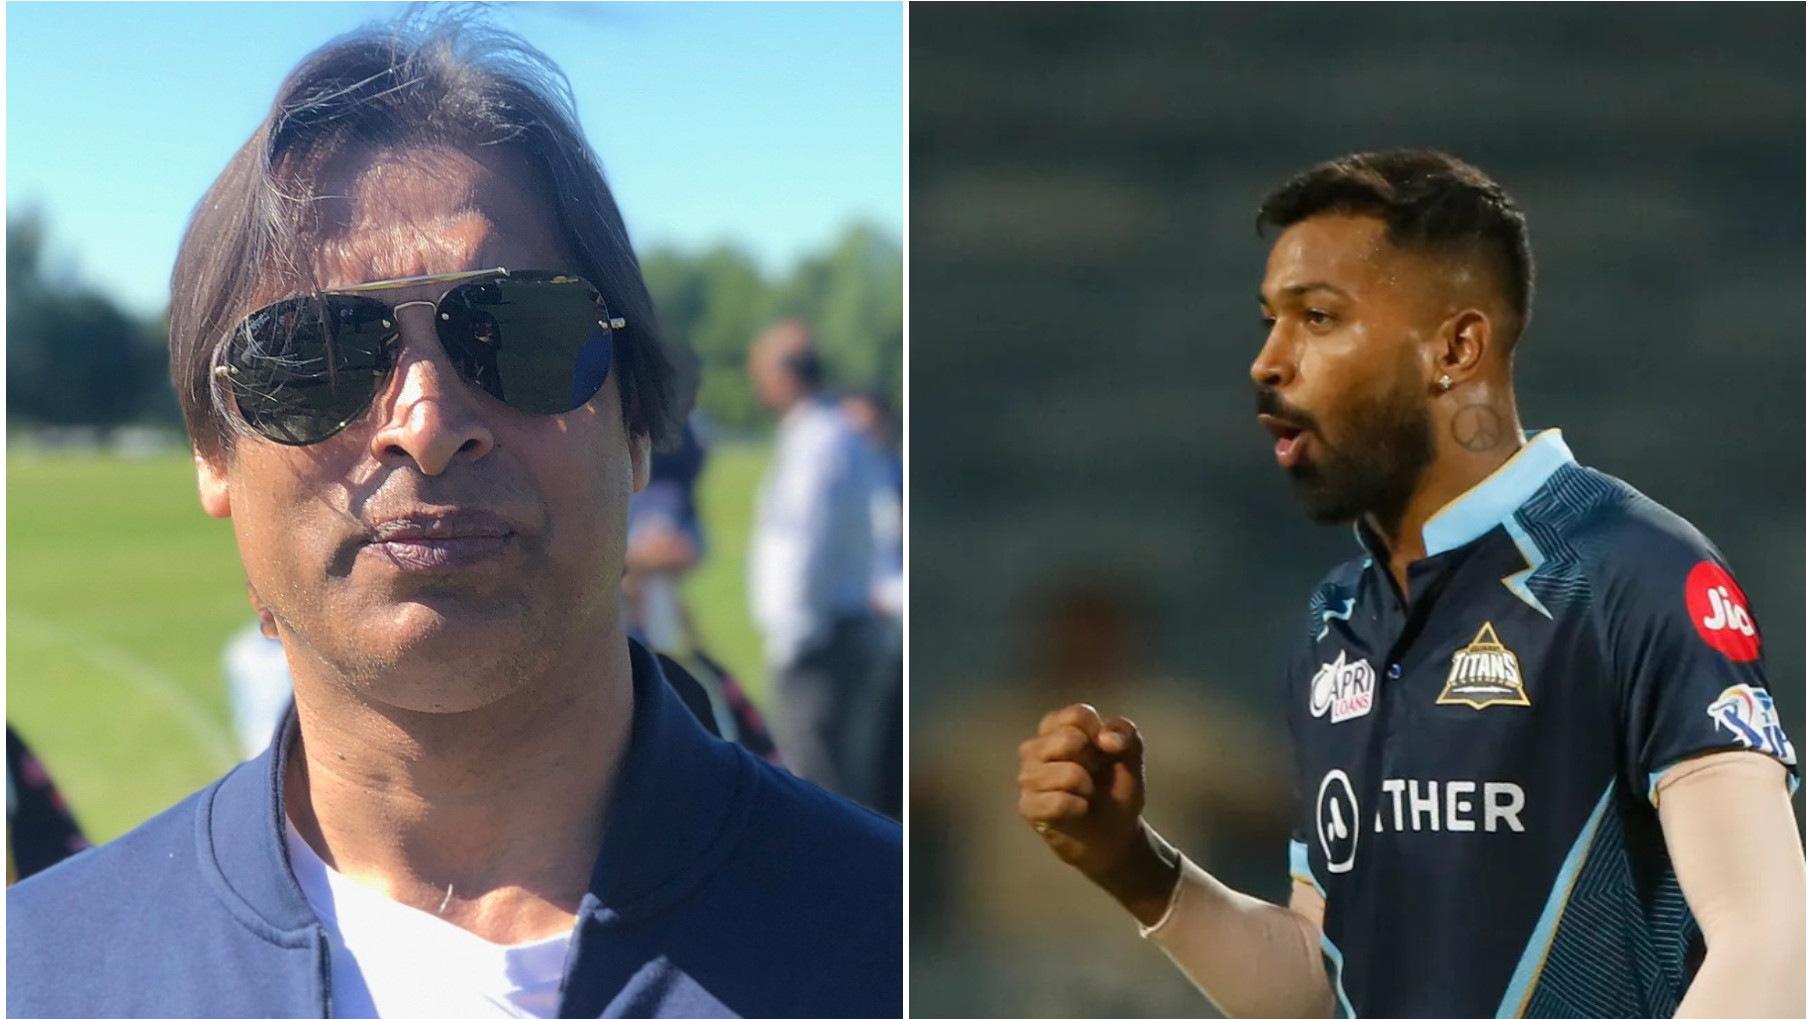 IPL 2022: “I warned him that he would get injured”, Akhtar recalls interaction with Pandya